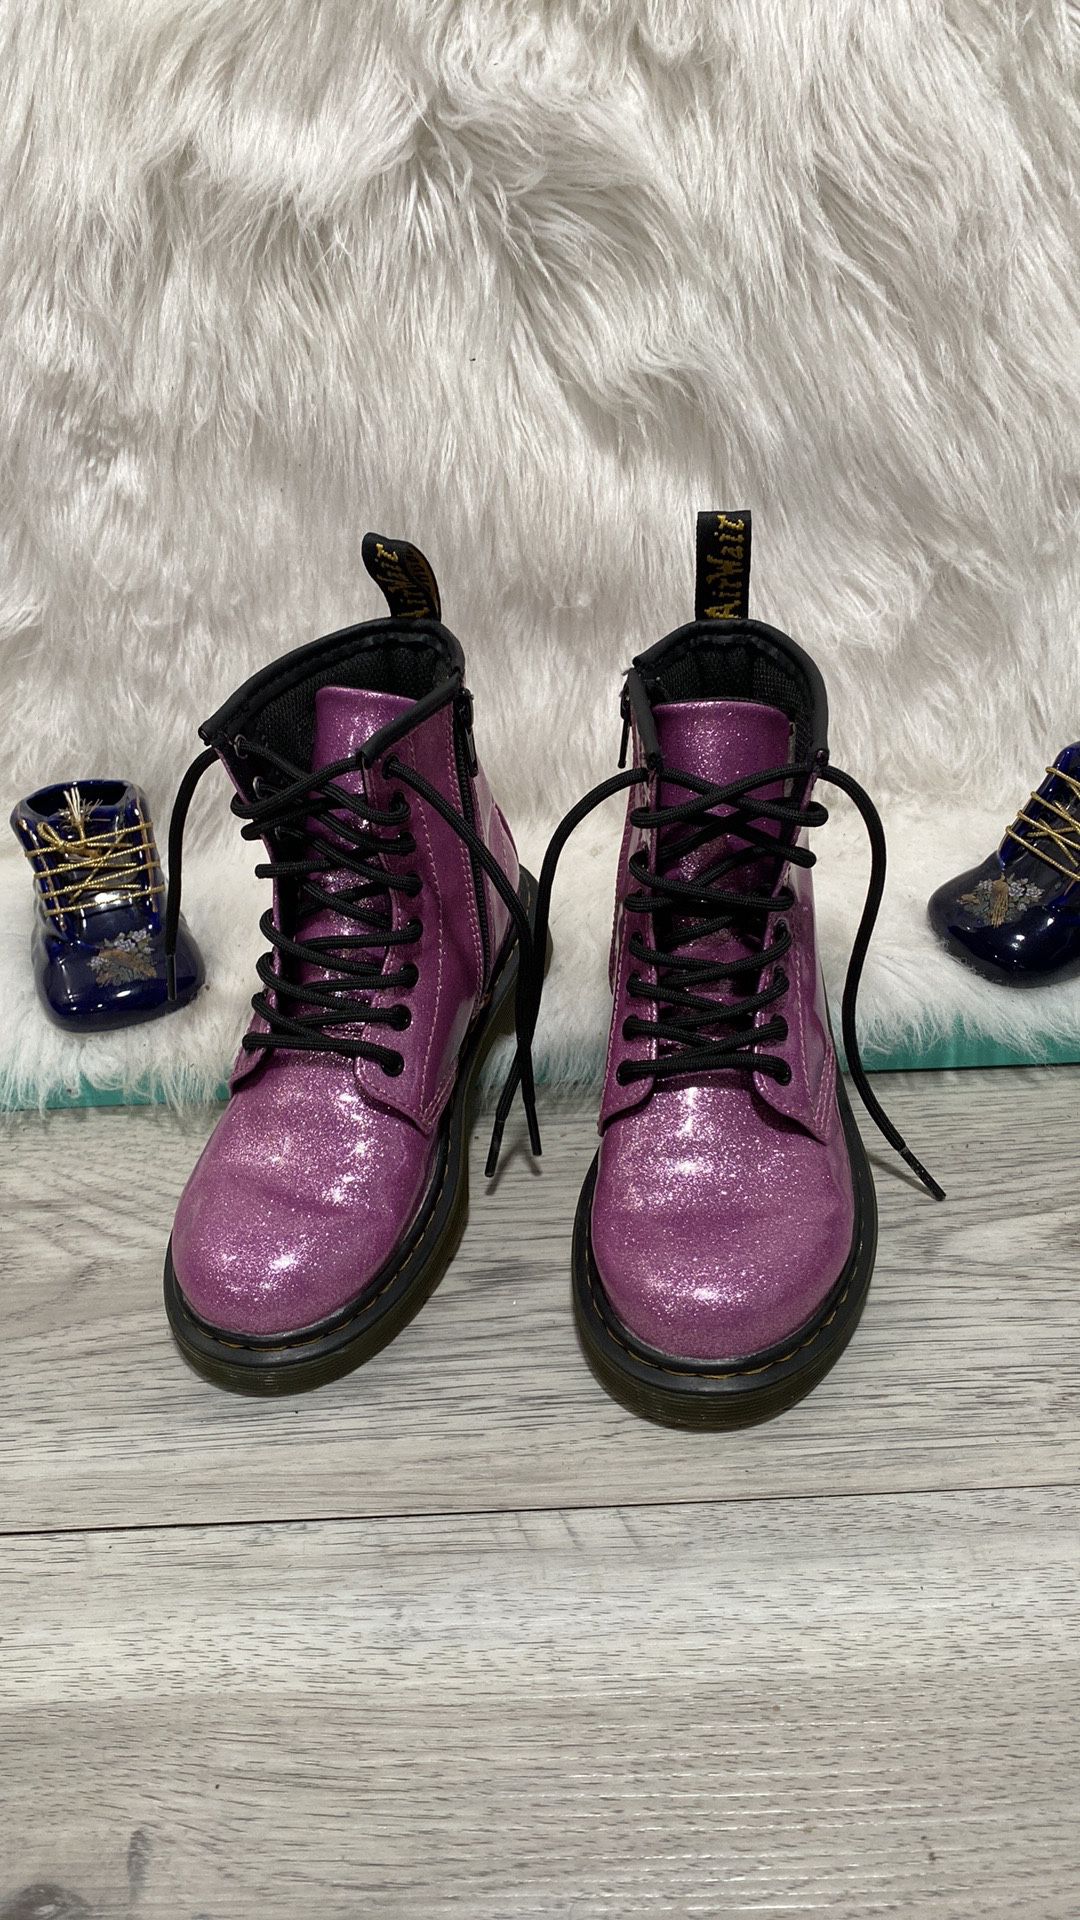 Dr Martens Little Girls Pink Size US 13 Lace Up 1460 Glitter Boots